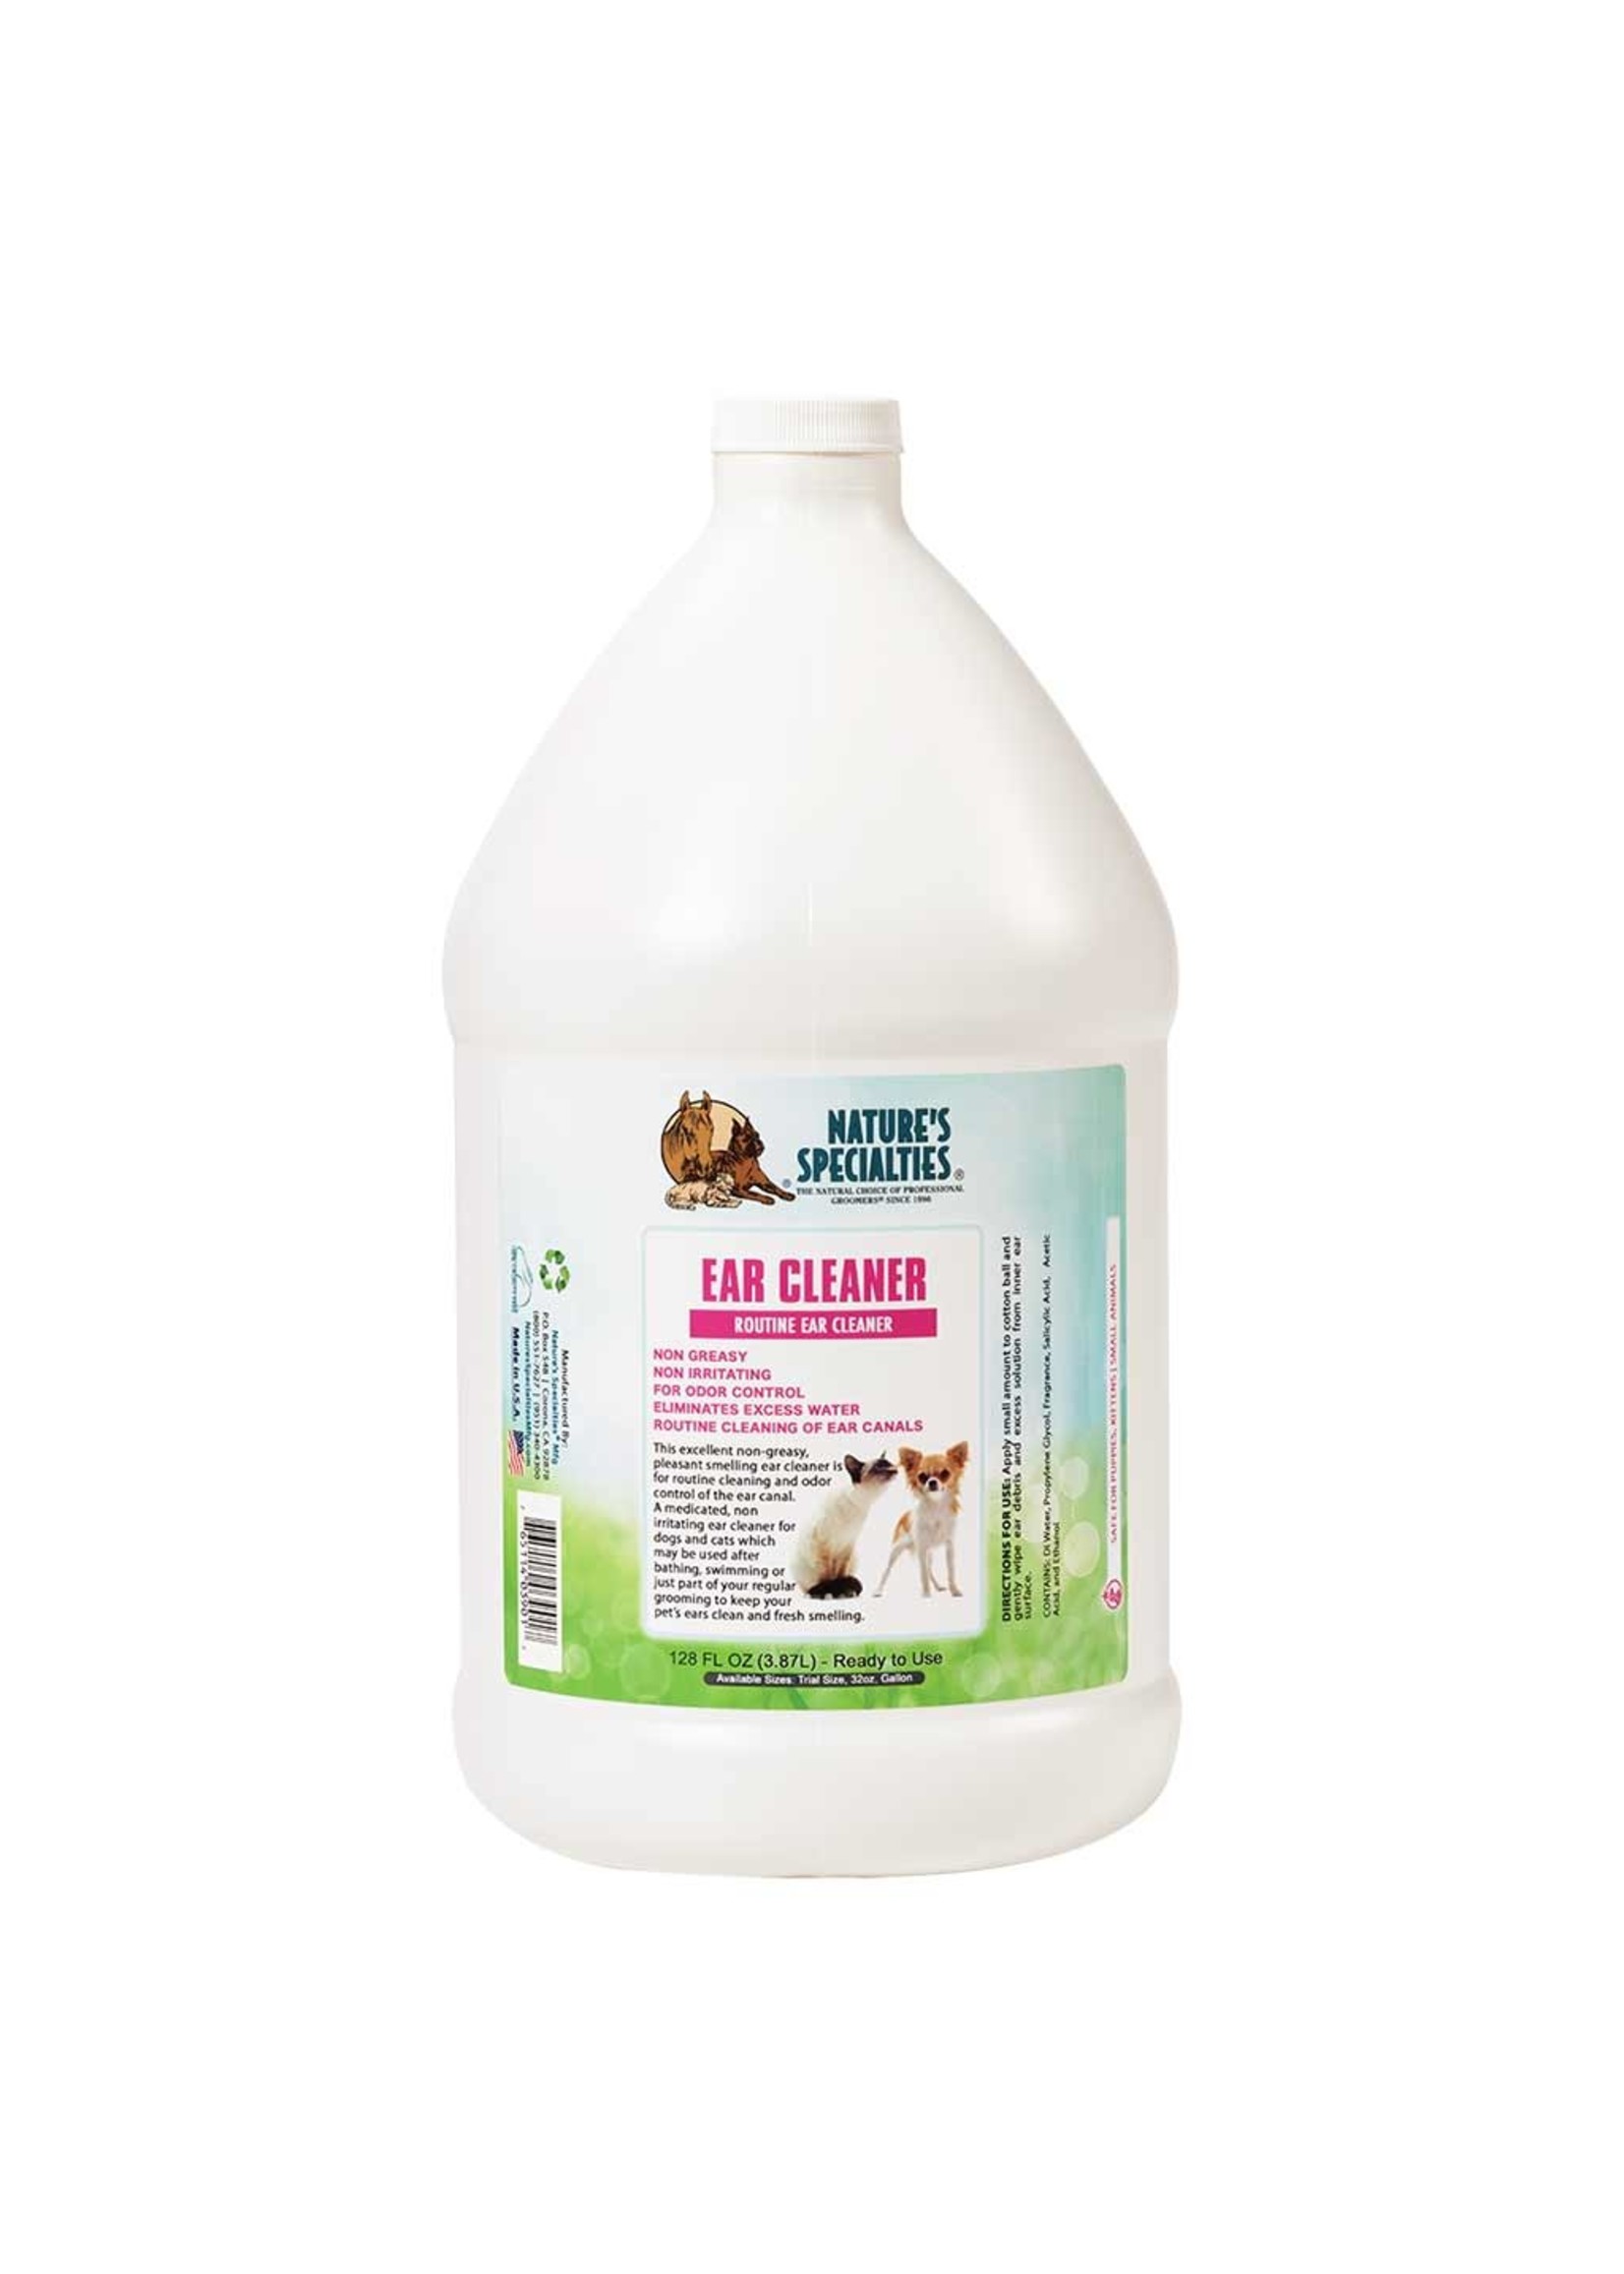 Nature's Specialties Nature's Specialties Routine Ear Cleaner (ready to use) Gallon